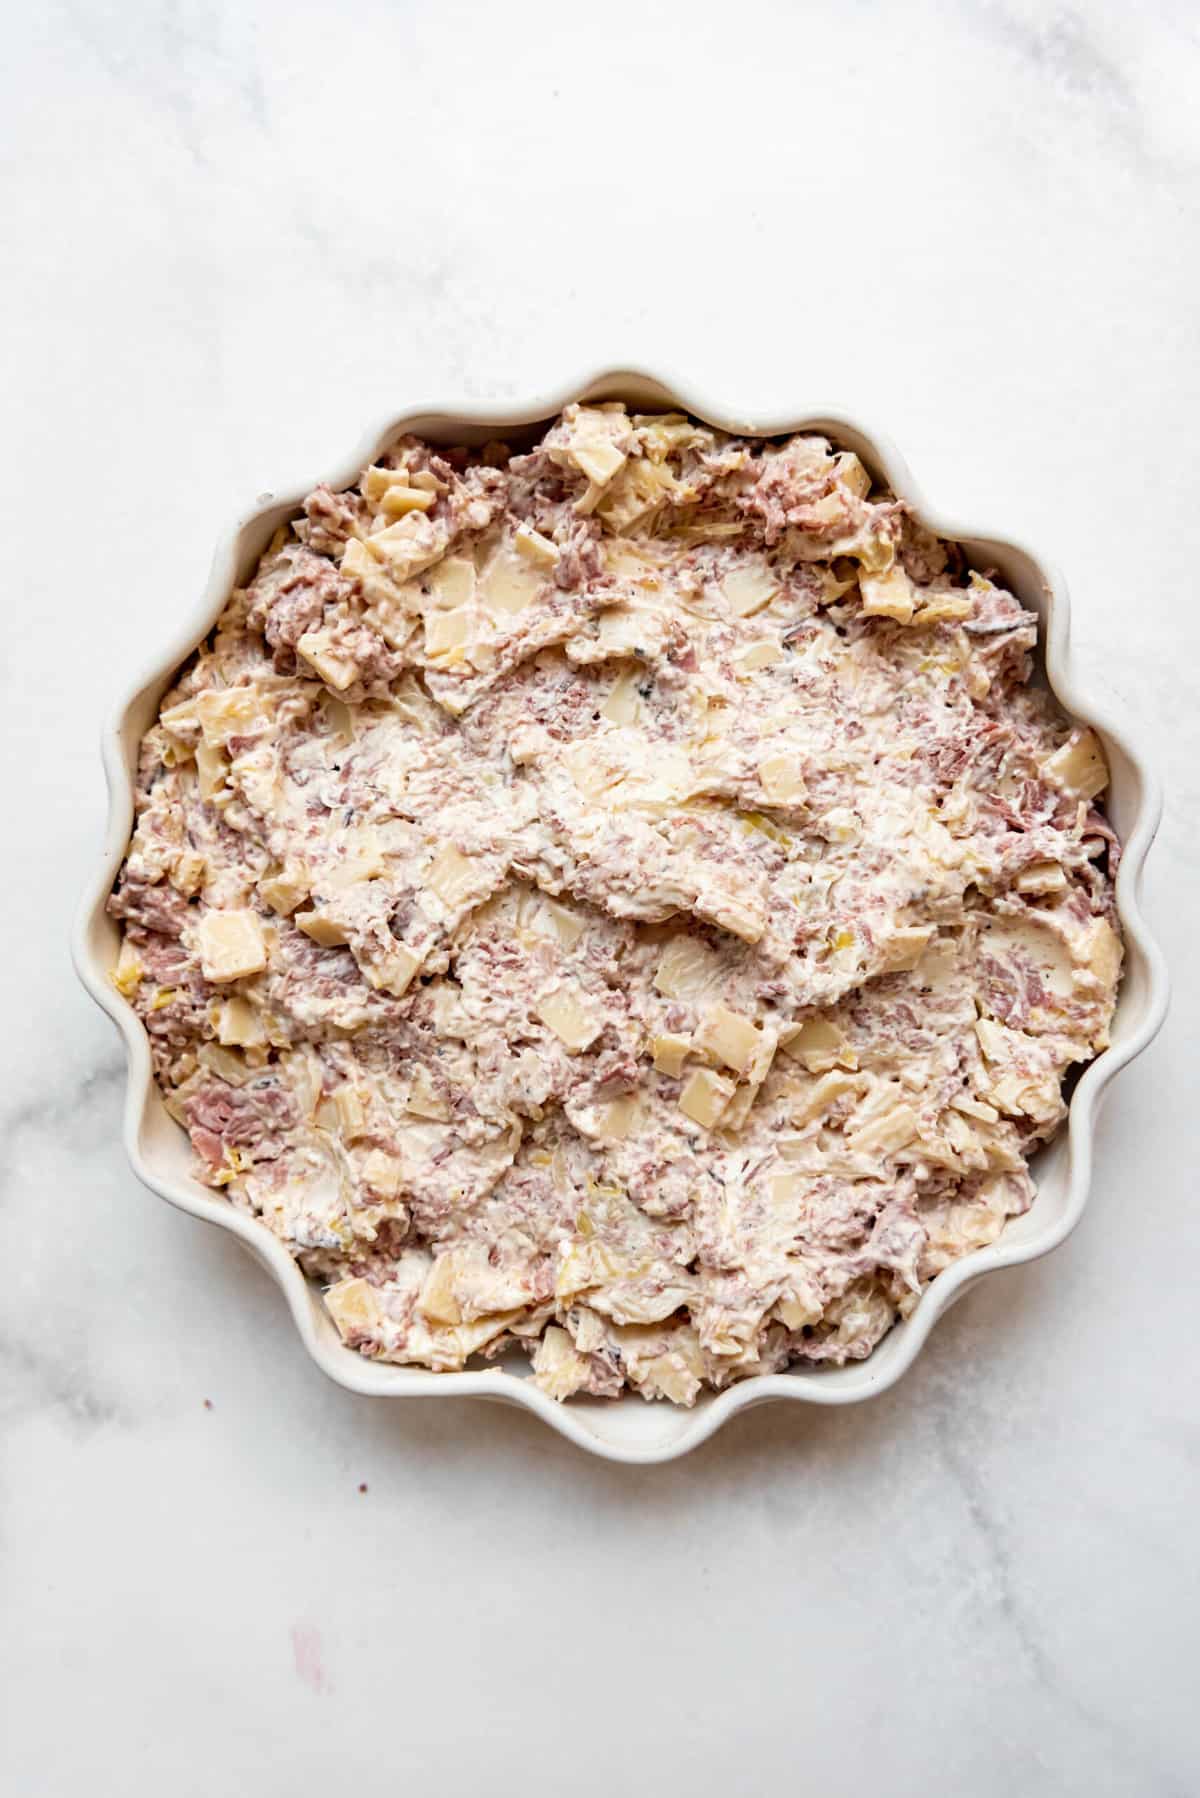 Reuben dip spread into a pie plate before being baked in the oven.